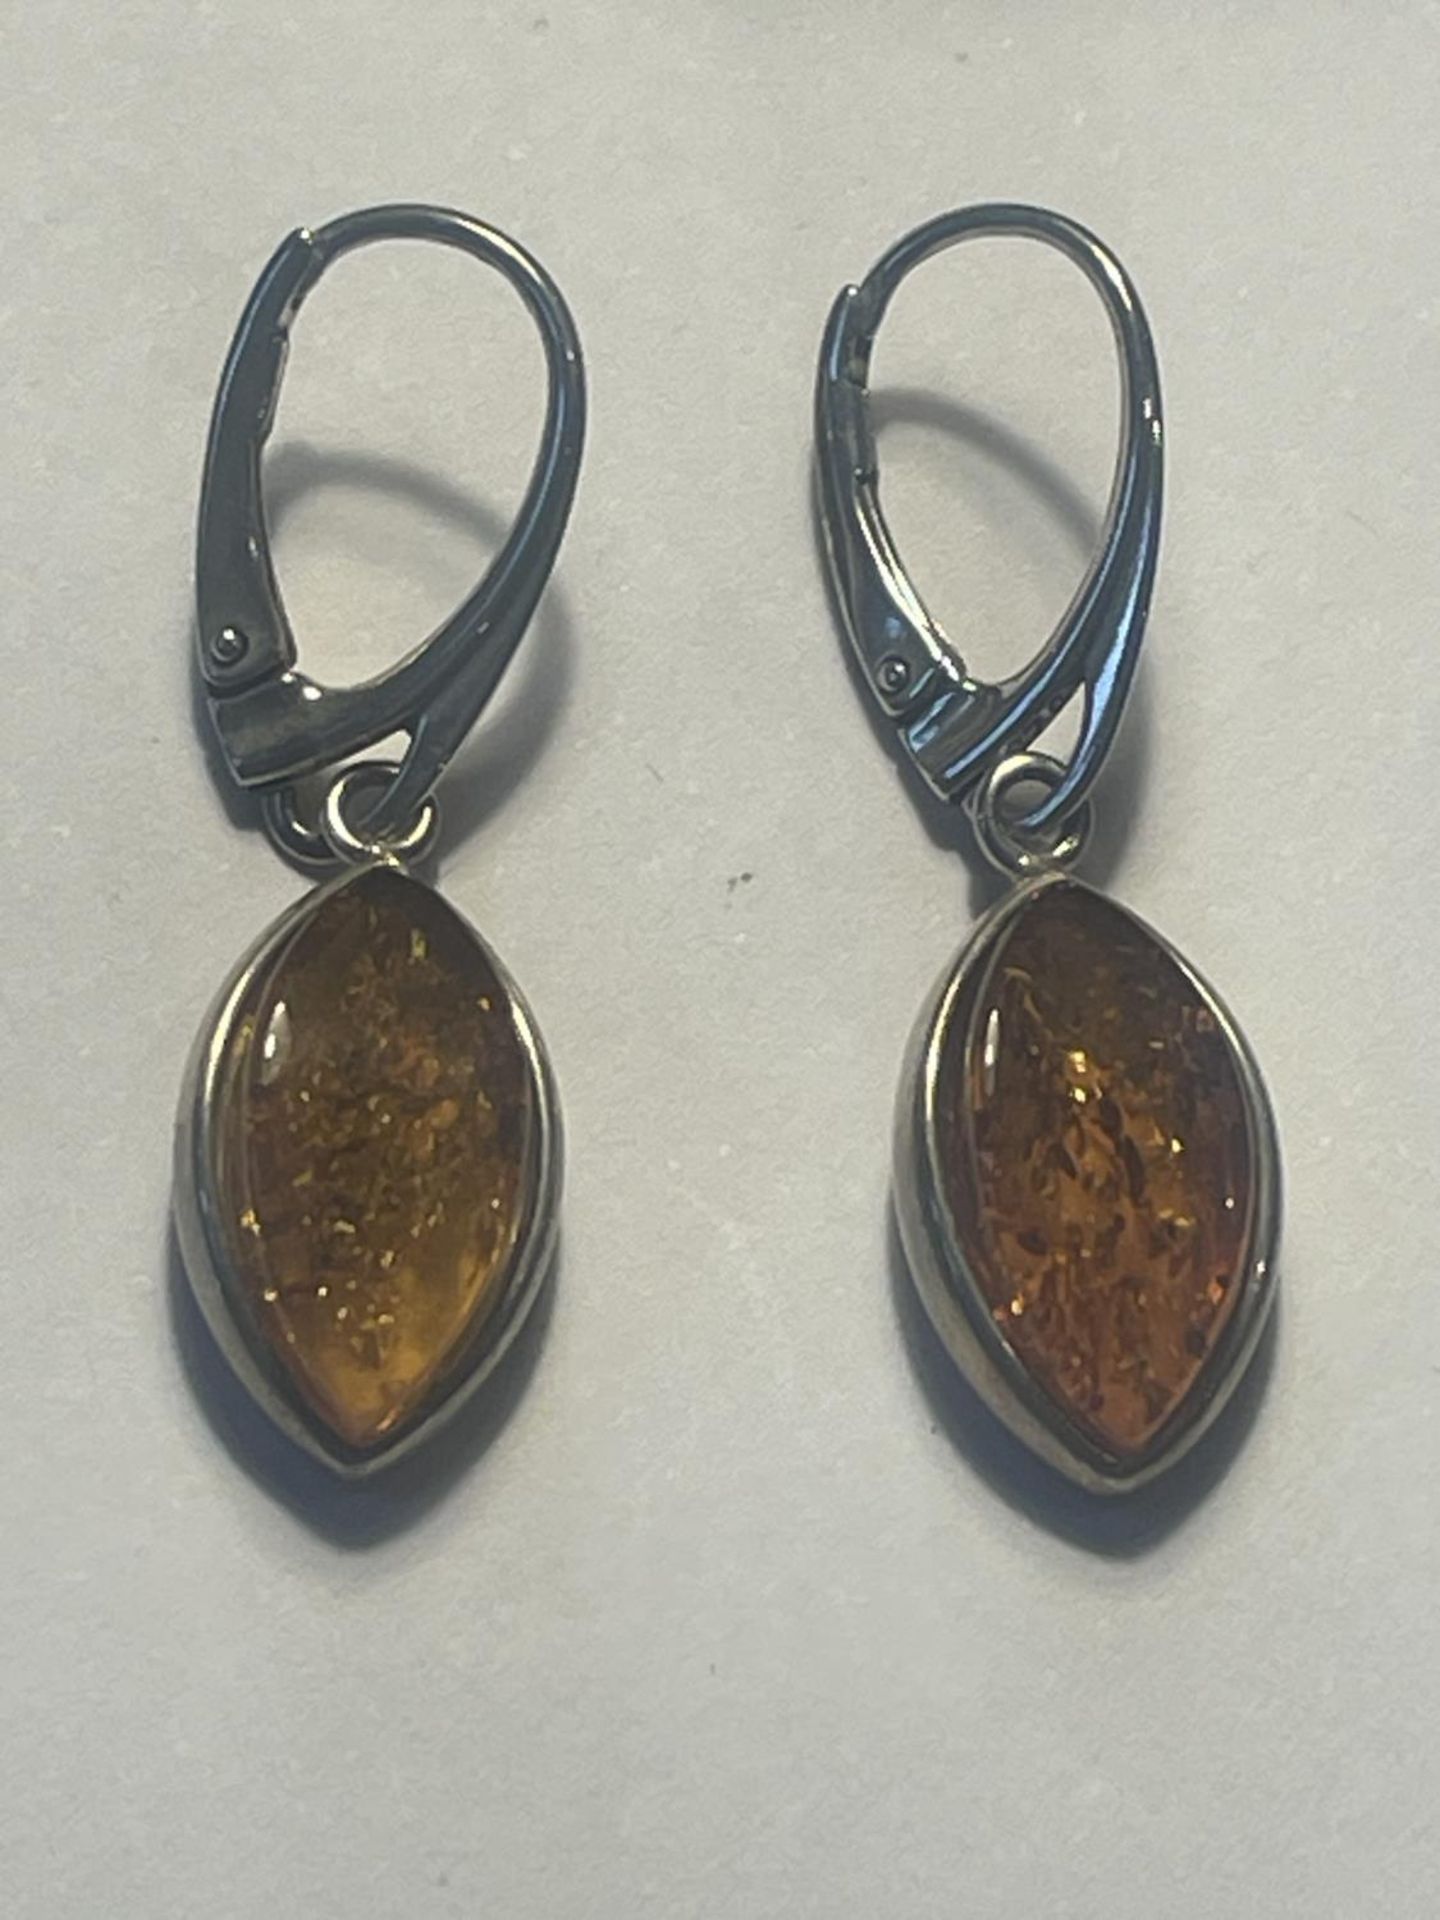 A PAIR OF SILVER AND AMBER DROP EARRINGS IN A PRESENTATION BOX - Image 3 of 3